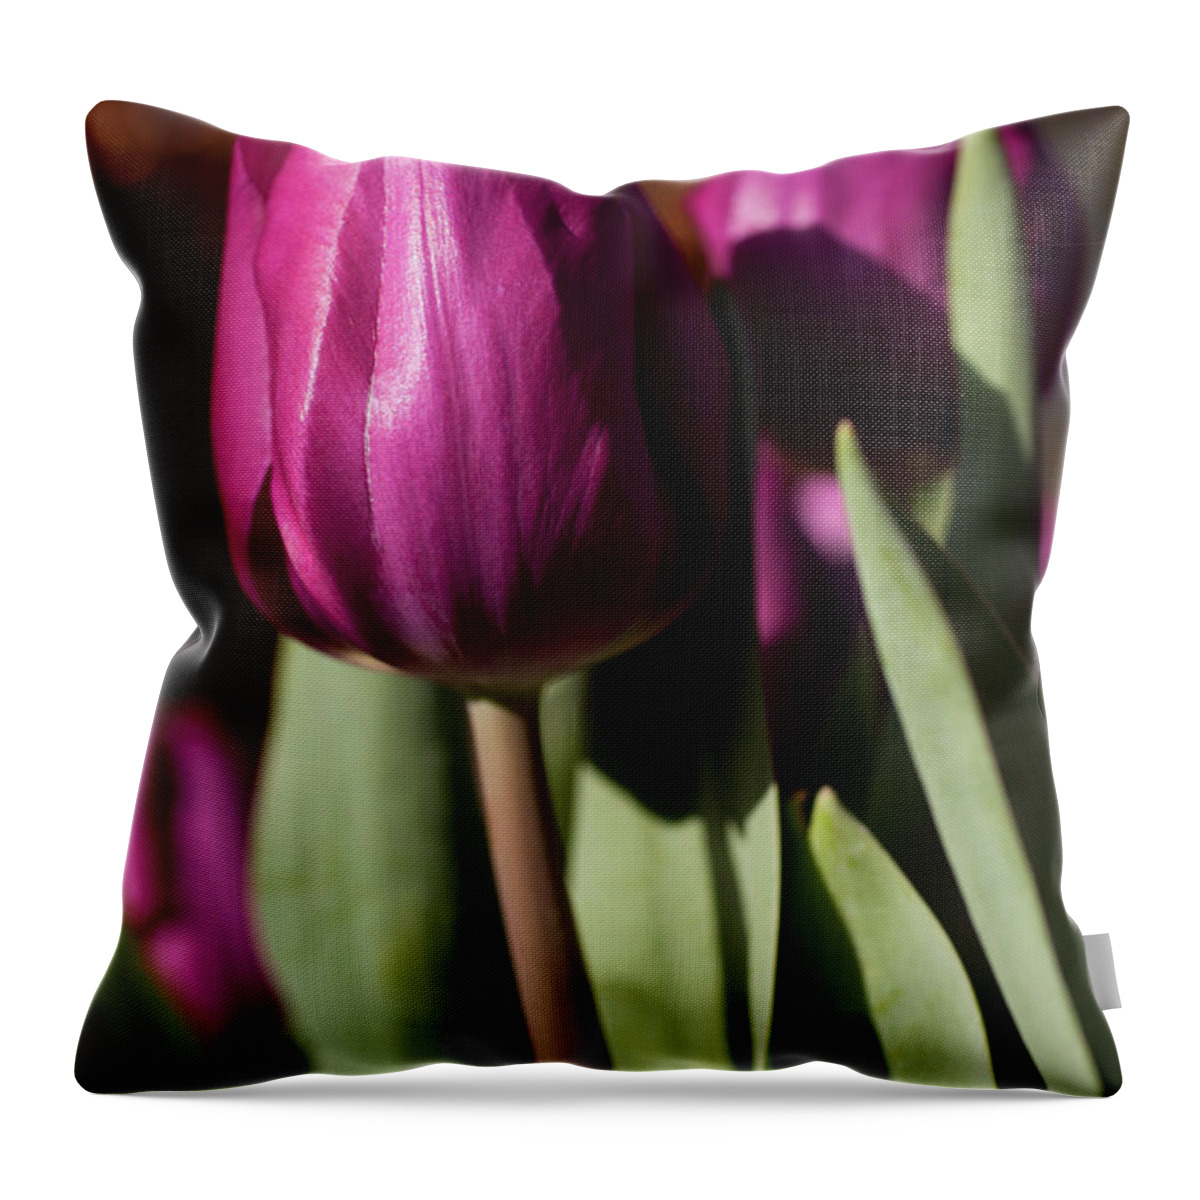 Purple Throw Pillow featuring the photograph Purple Tulip by Caroyl La Barge